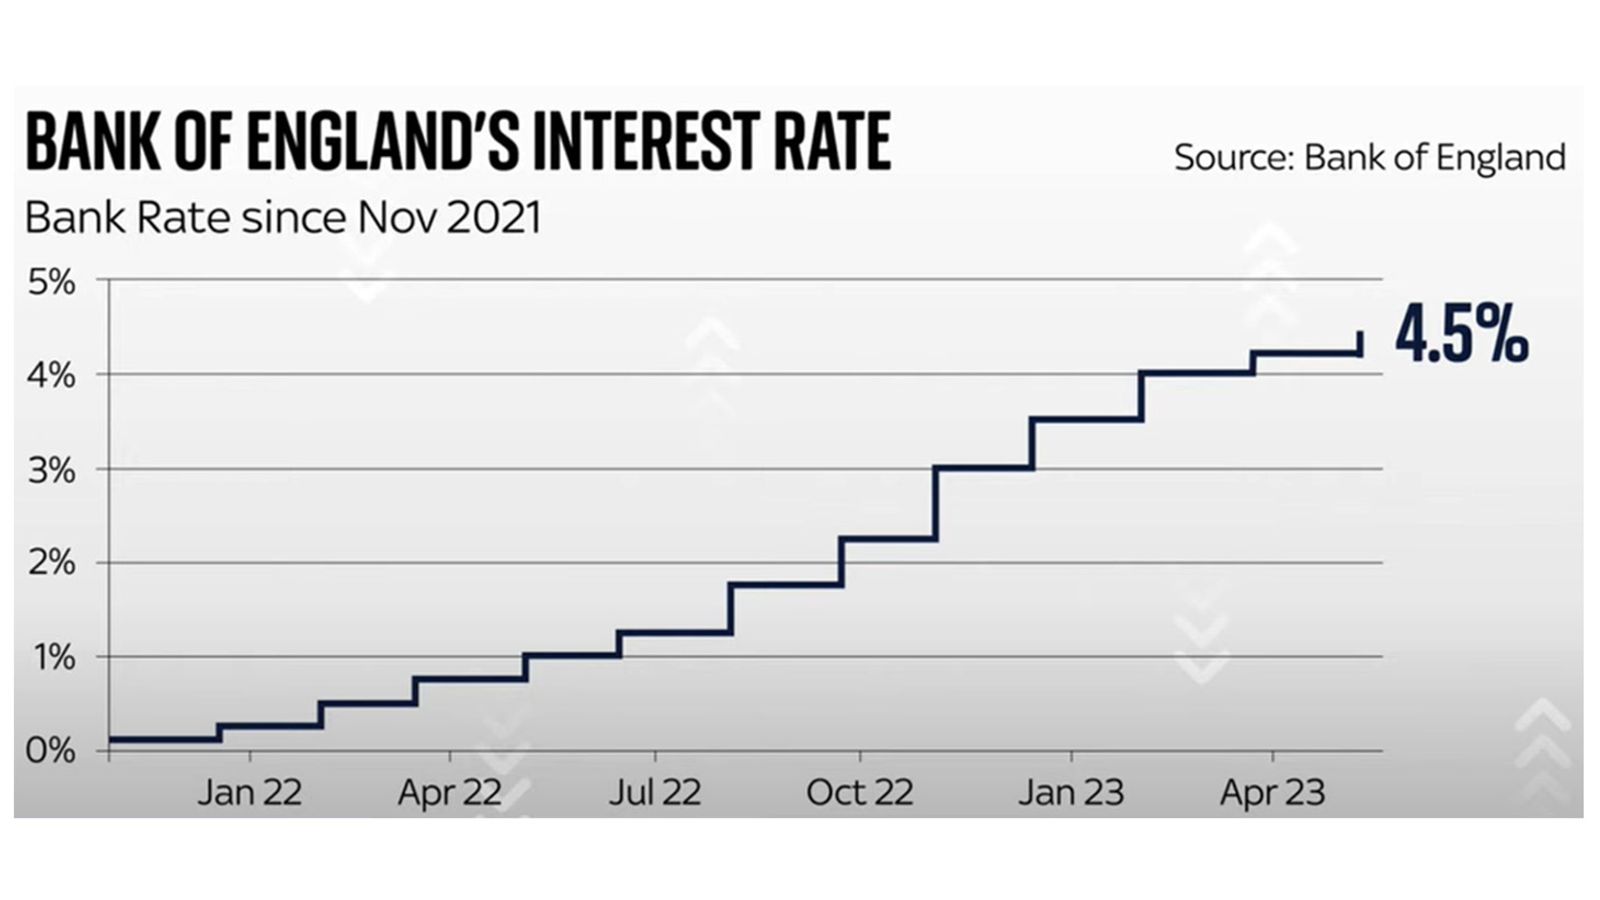 Bank of England interest rate increased 0.25 percentage points to 4.5%